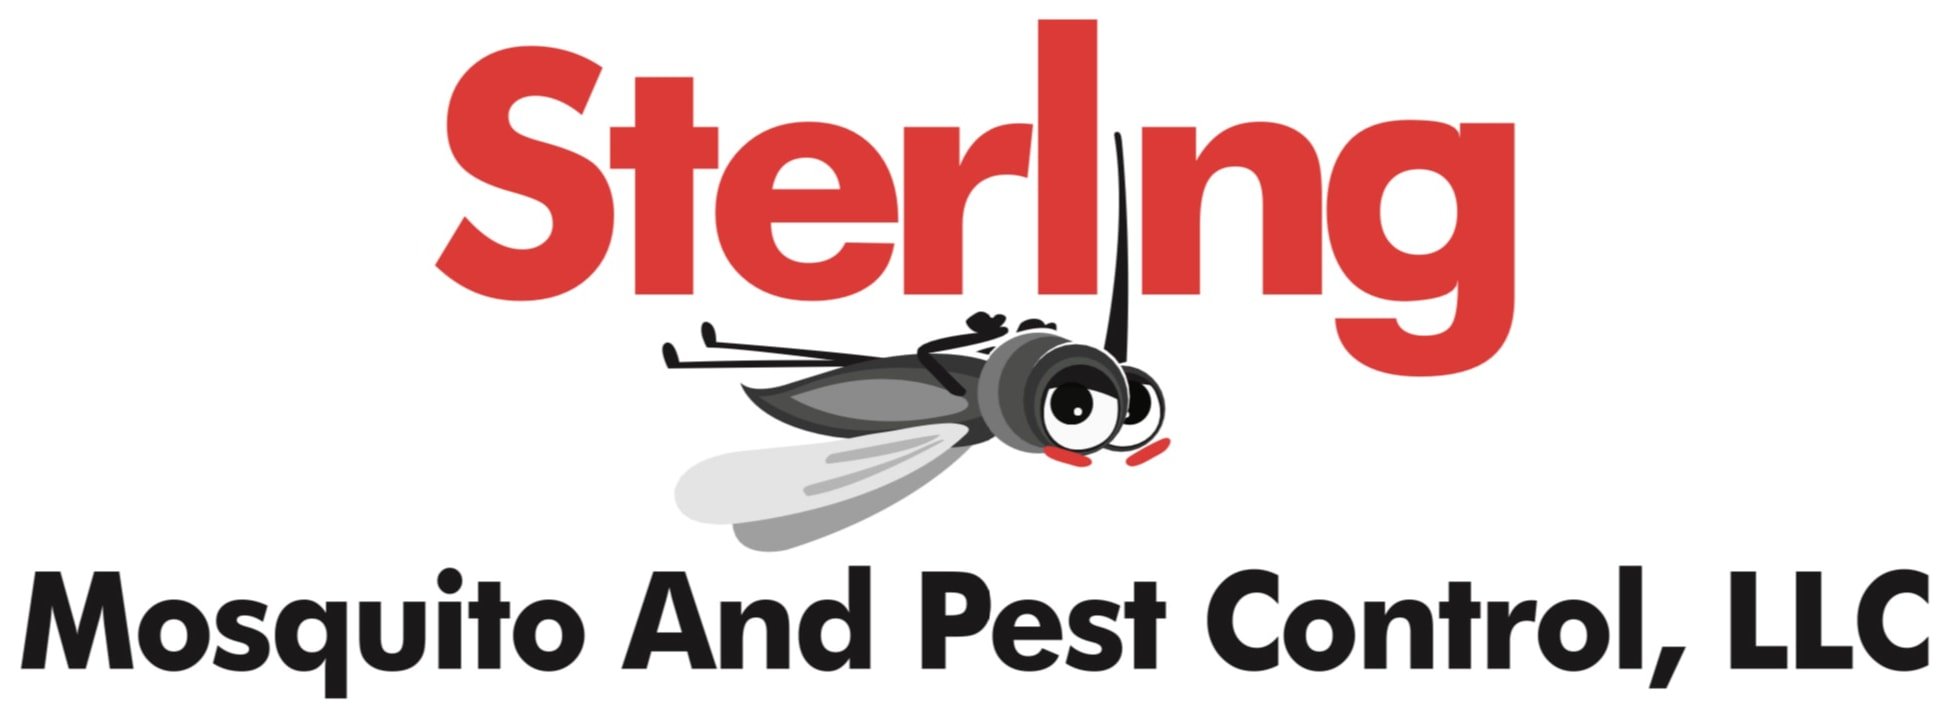 Sterling Mosquito and Pest Control LLC